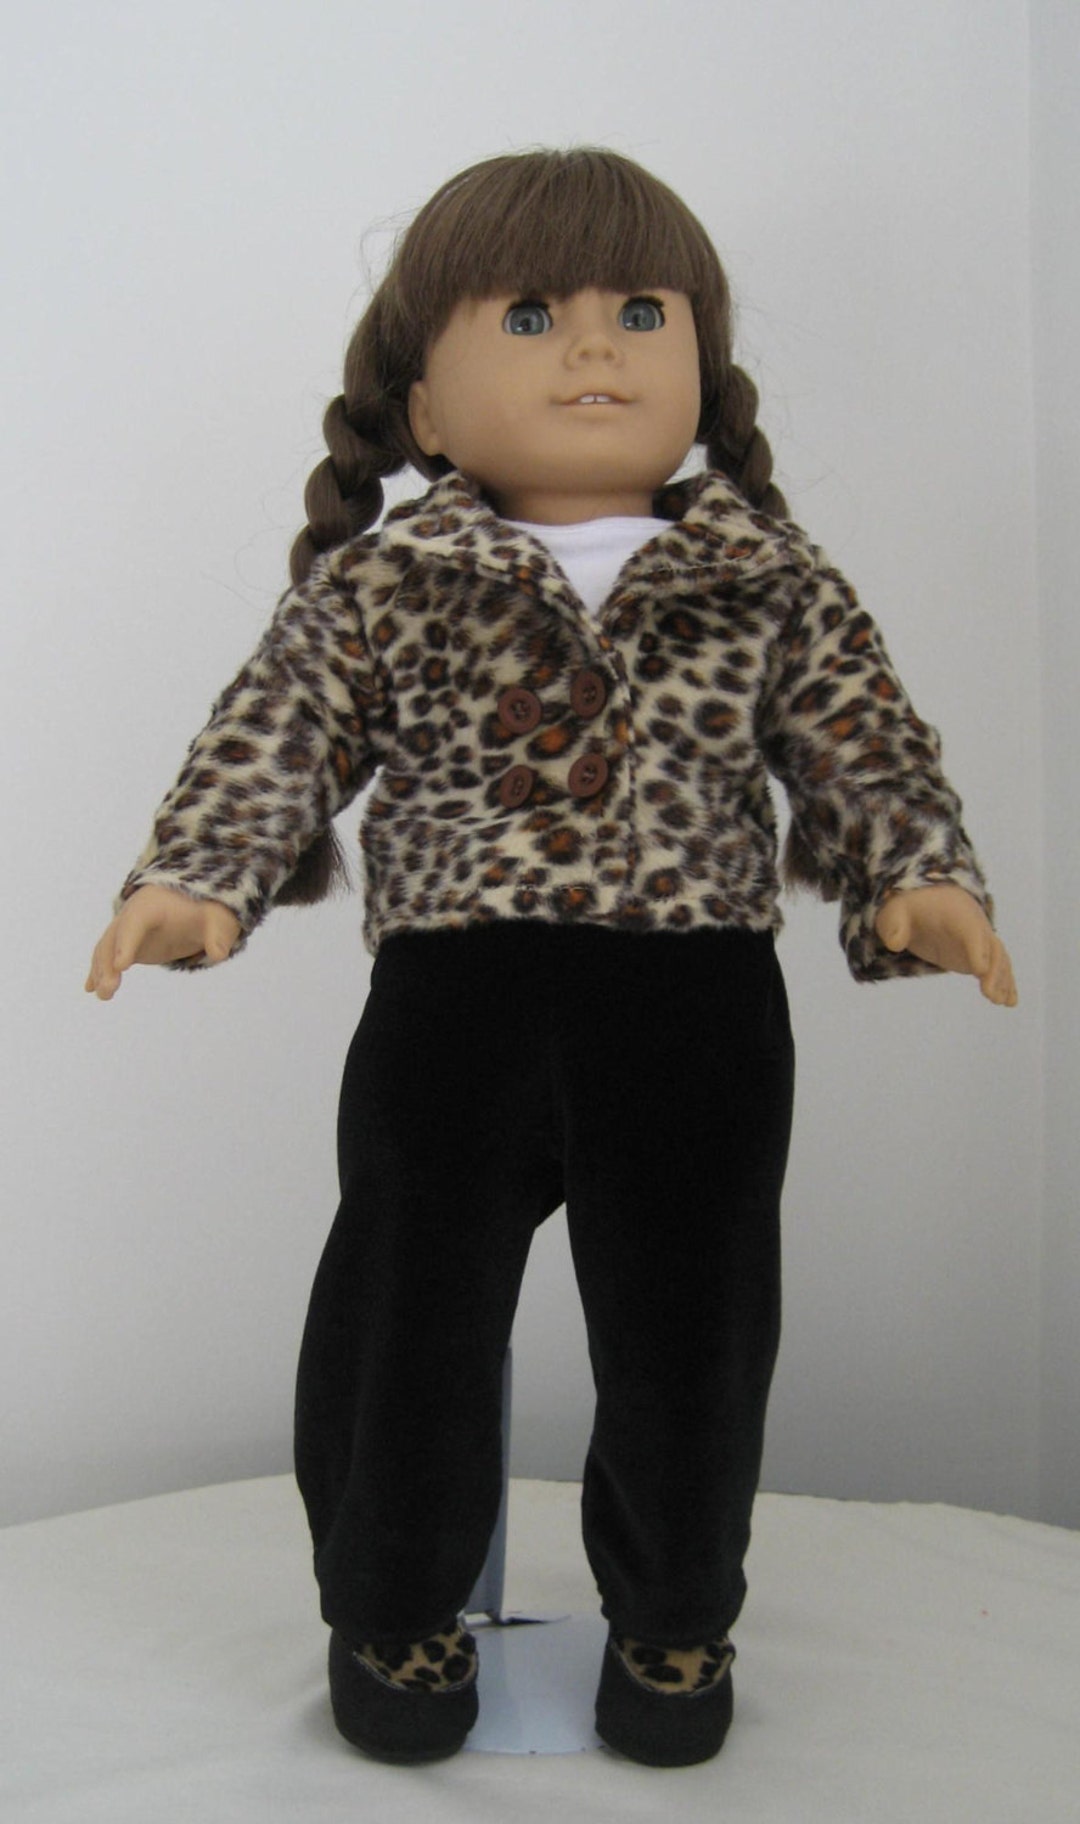 Doll Clothes Made to Fit AMERICAN GIRL DOLLS, 3 Piece Leopard Print ...